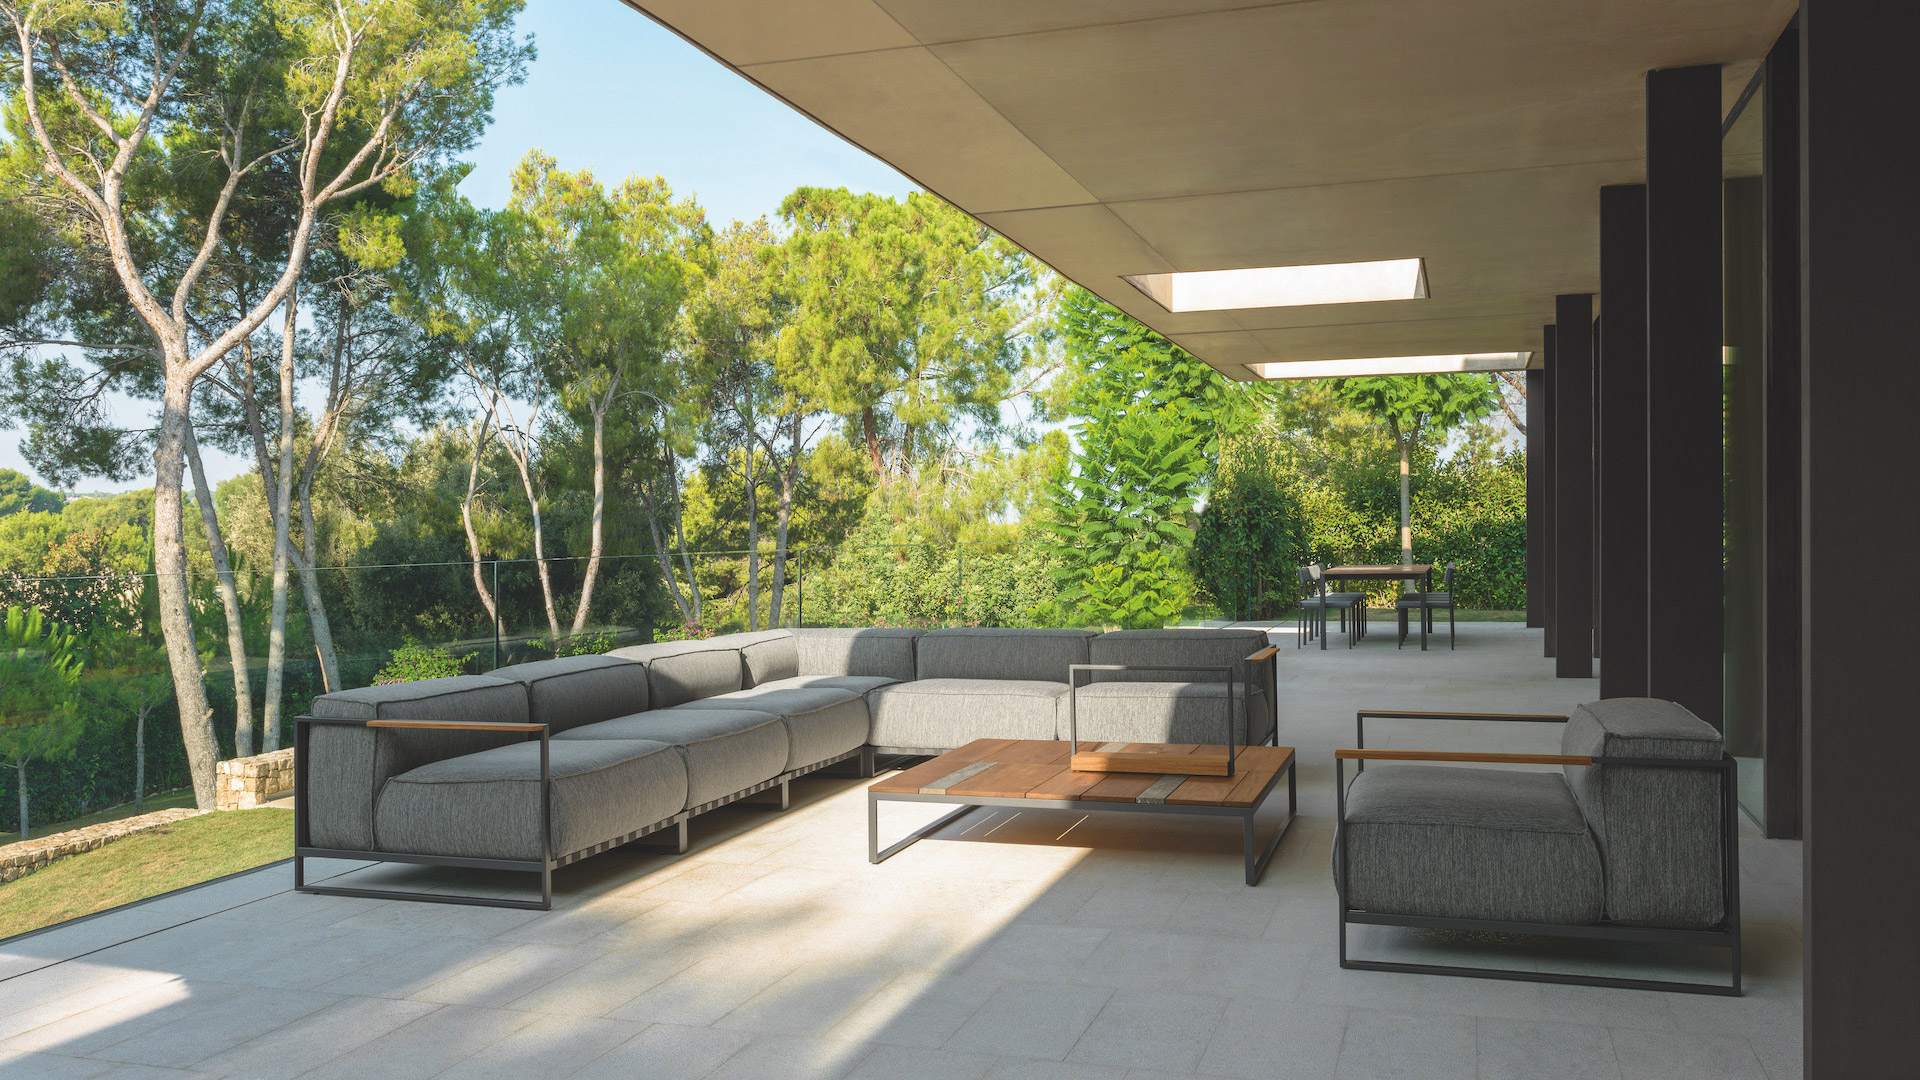 Italian brand Talenti brings its chic outdoor furniture to New York